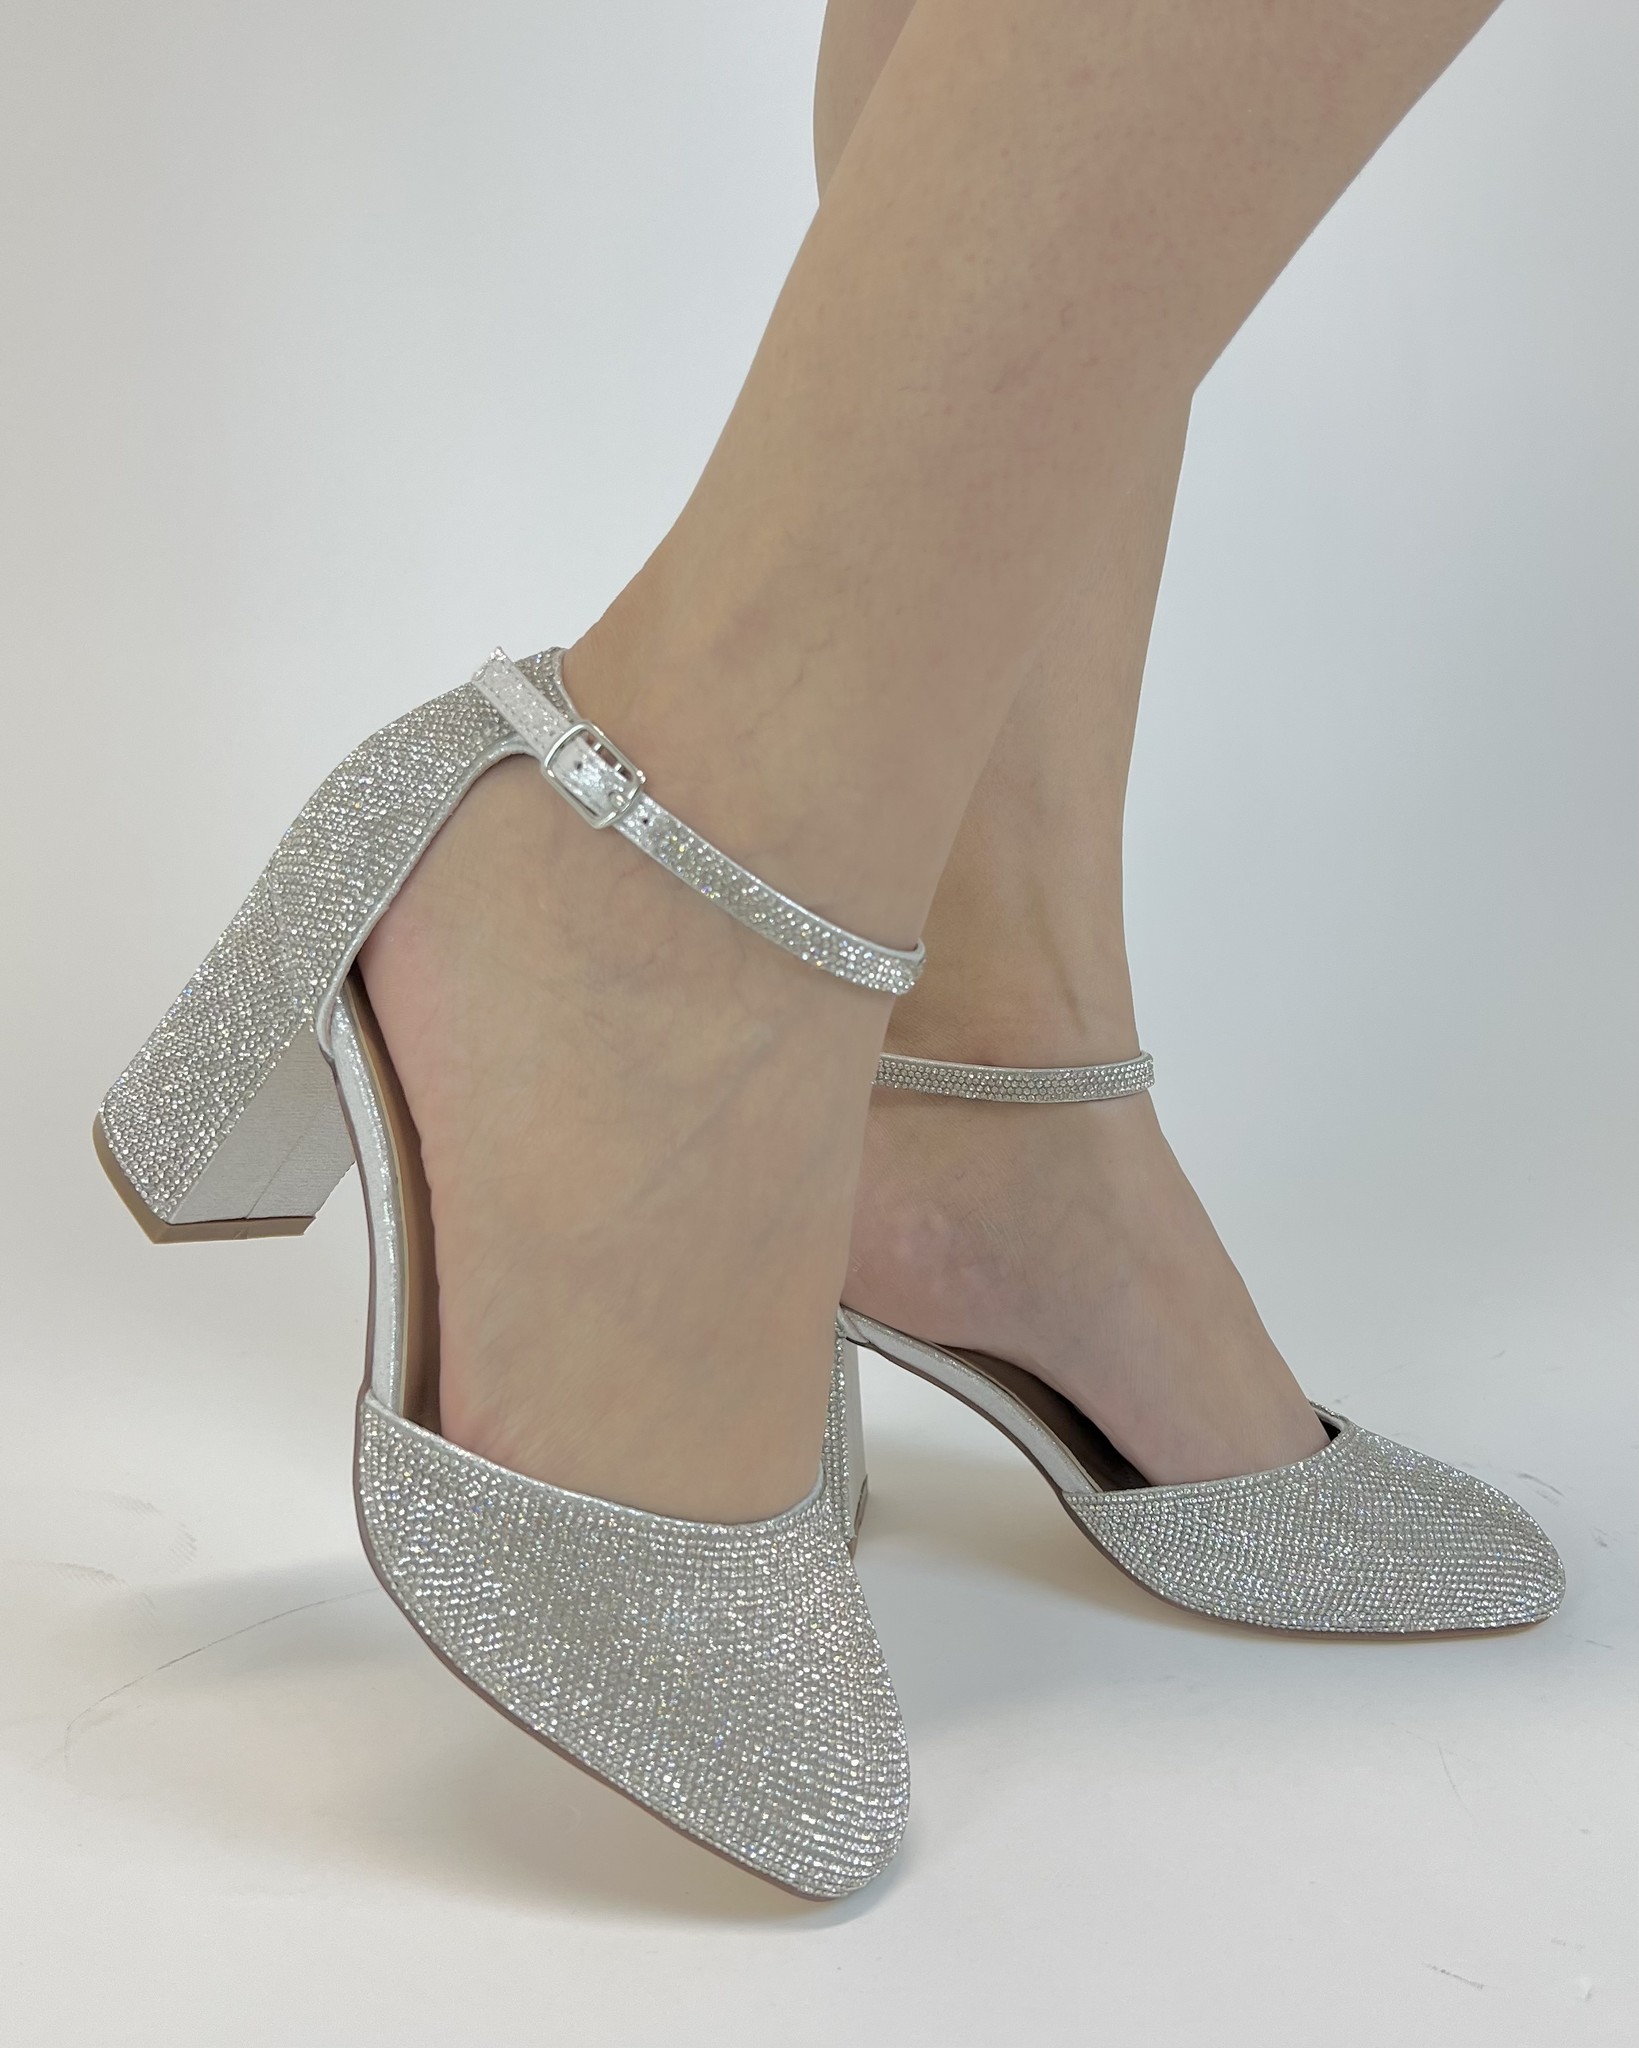 Bella and Bloom Boutique - Shayleigh Suede Block Heels: Taupe